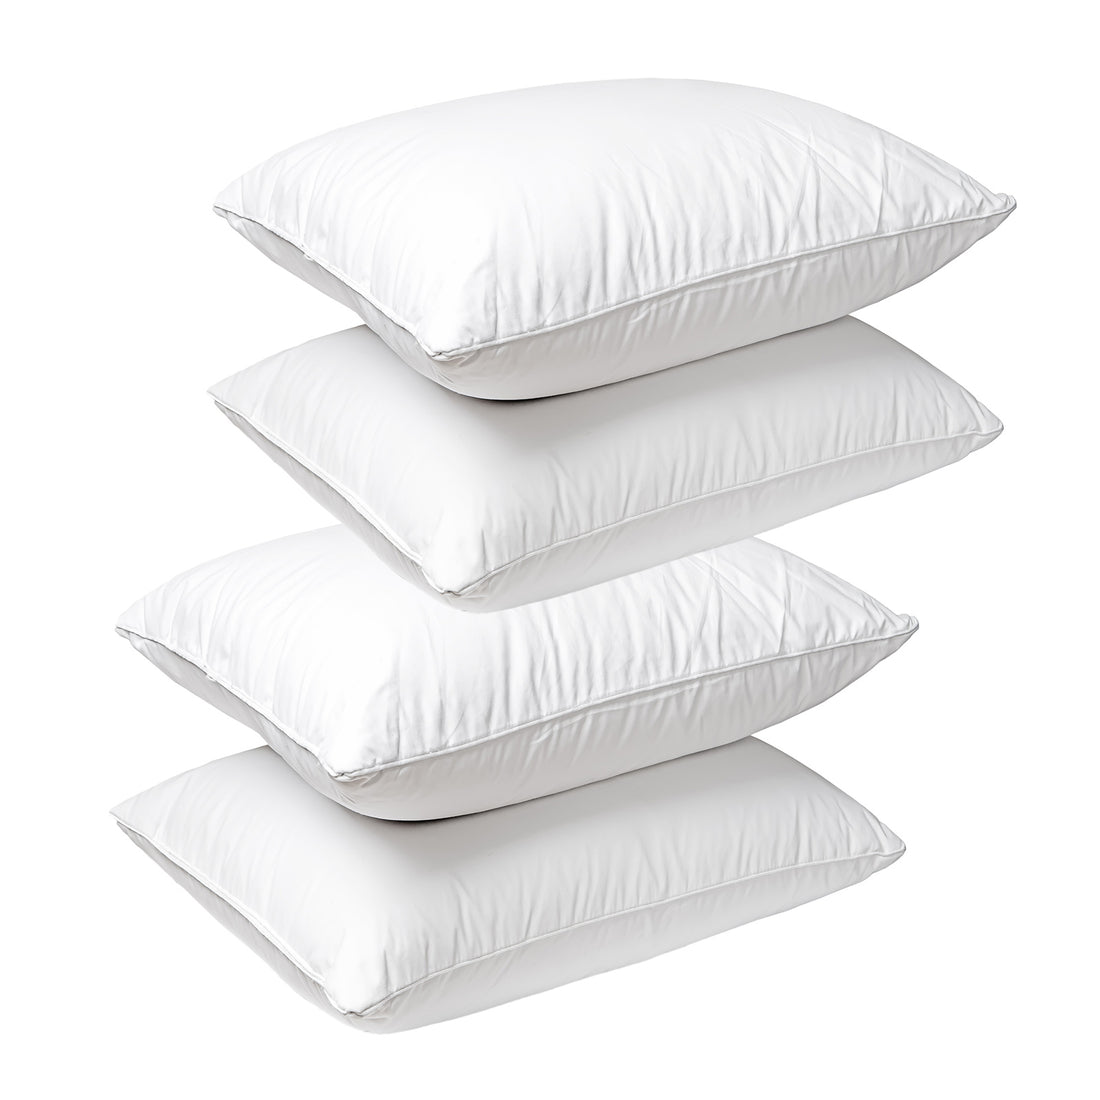 Royal Comfort Duck Feather Down Pillows 50 x 75cm Set Hotel Quality-Bedding-PEROZ Accessories